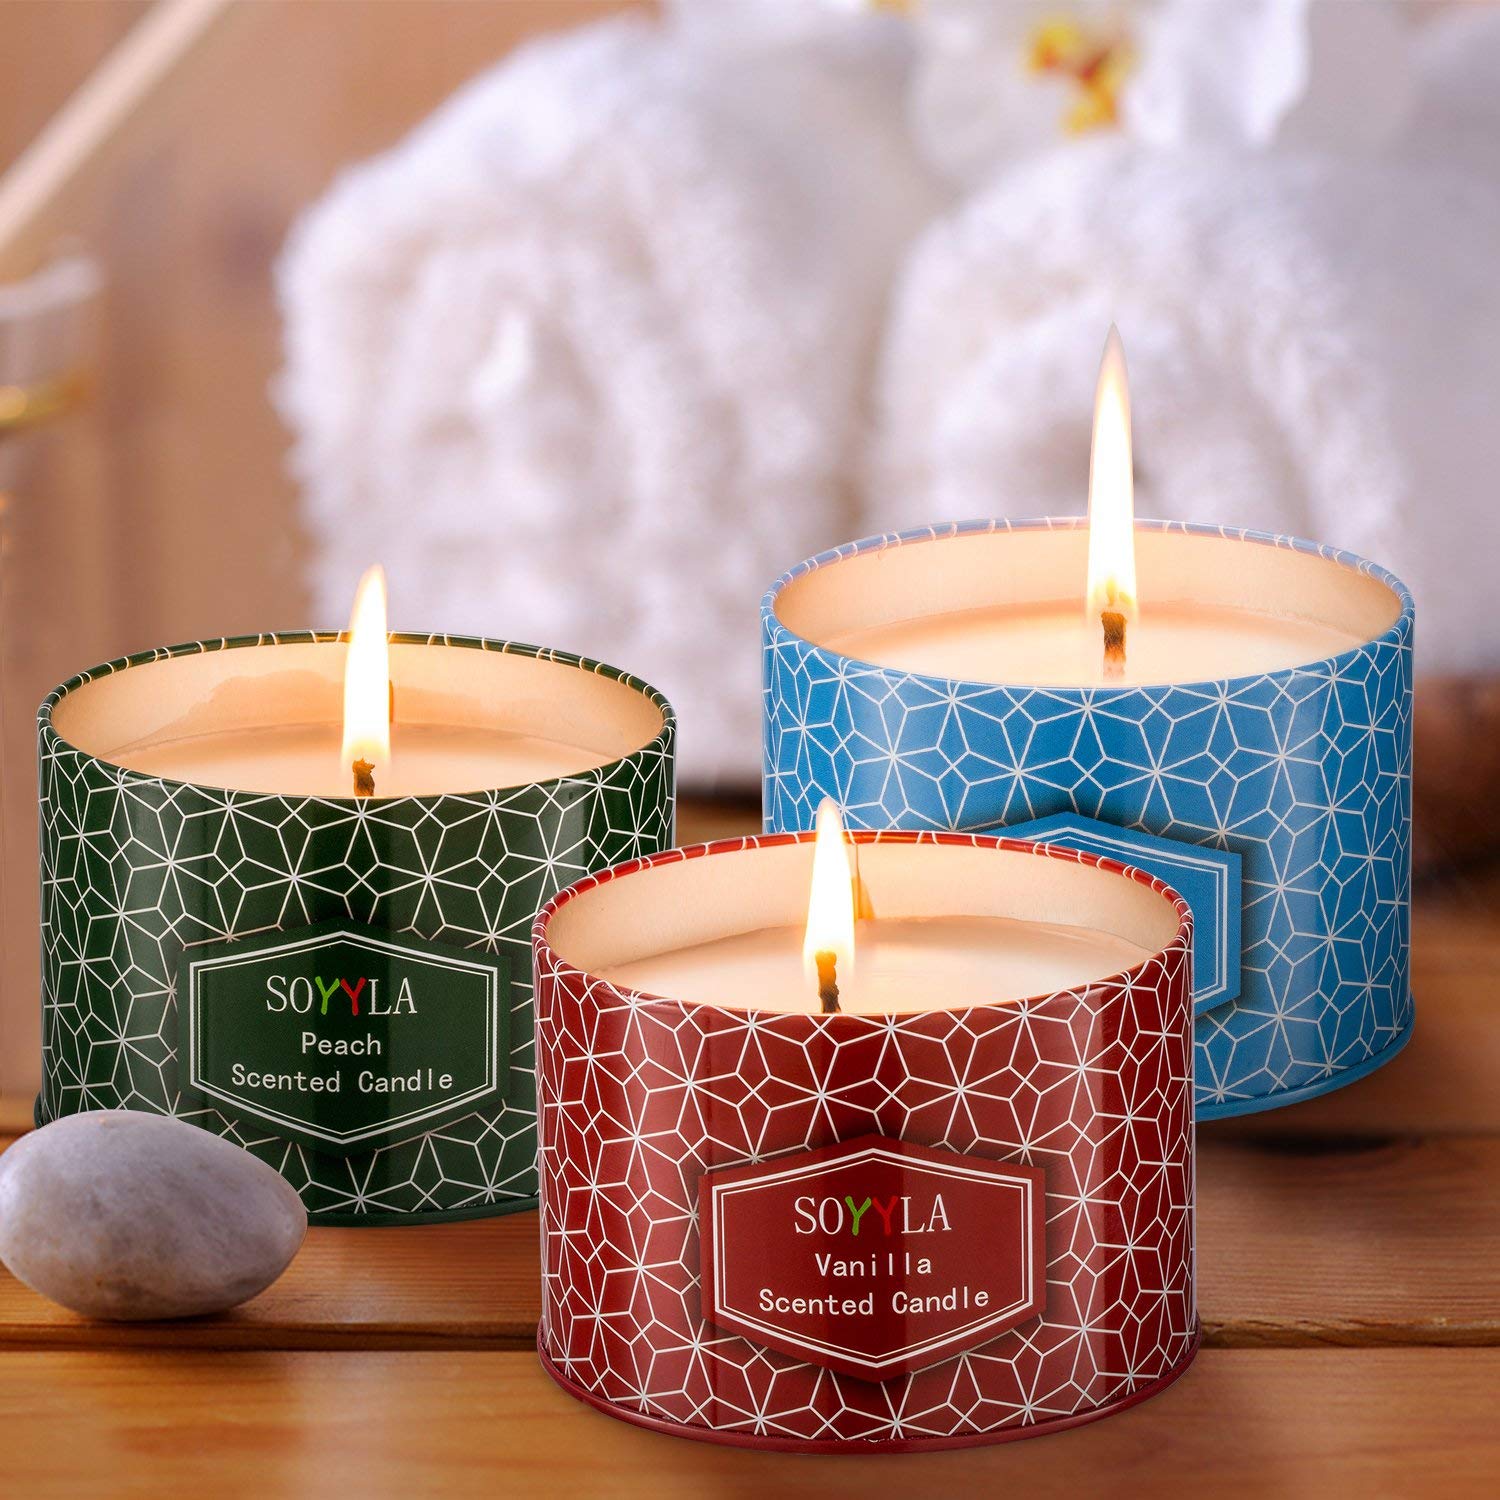 Luminary свечи. Scented Candle свеча. Аромасвечи Scented Candle. Свечи Home Fragrance Scented Candle. Красивые свечки.